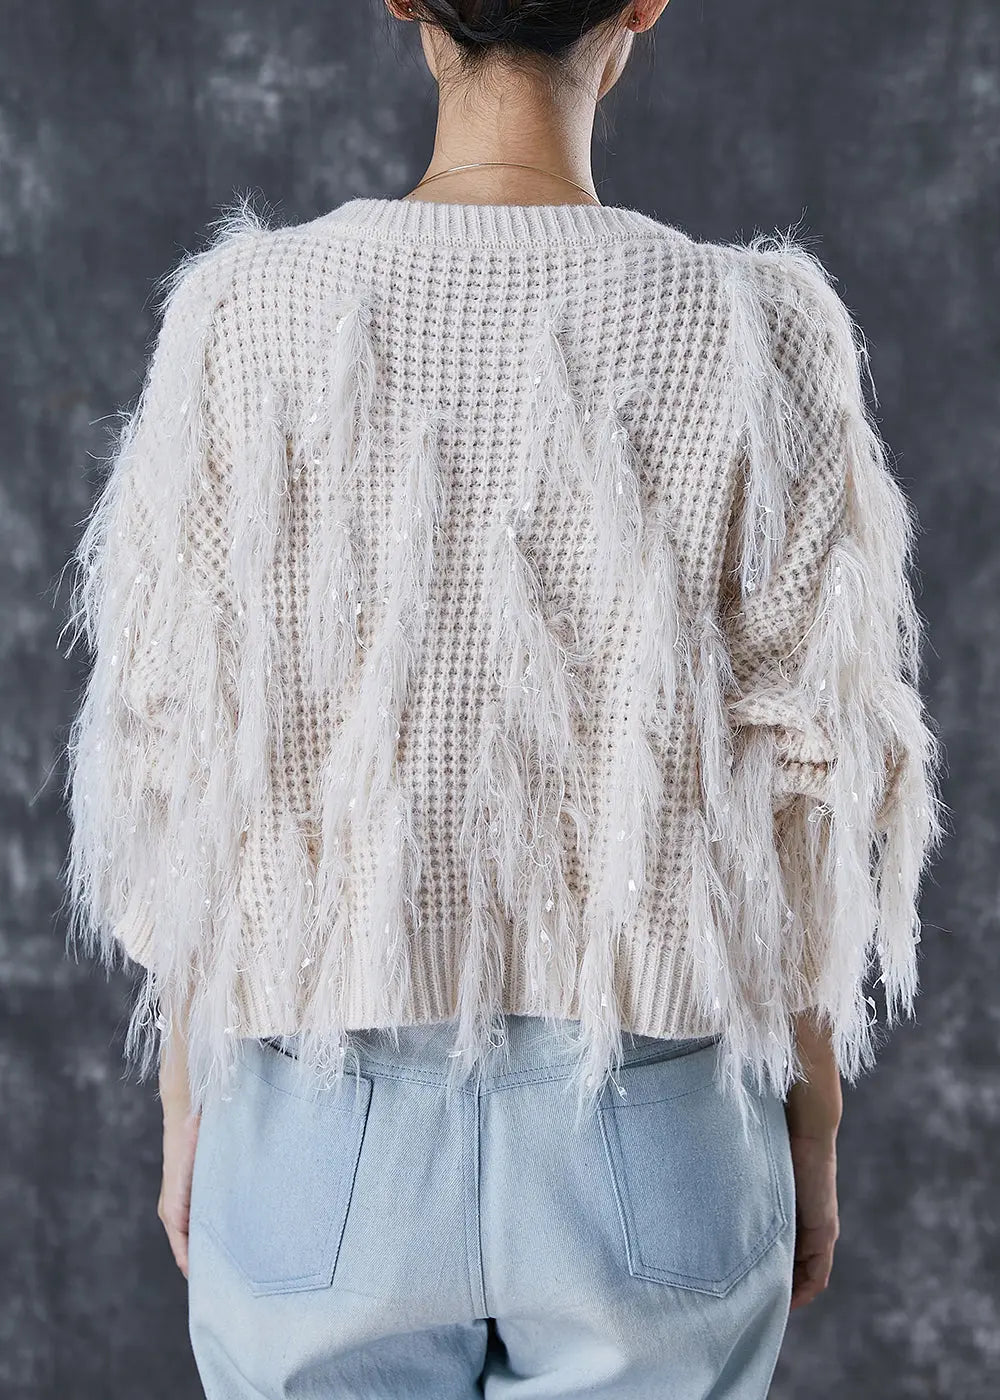 White Thick Knit Sweaters Tasseled Sequins Winter Ada Fashion